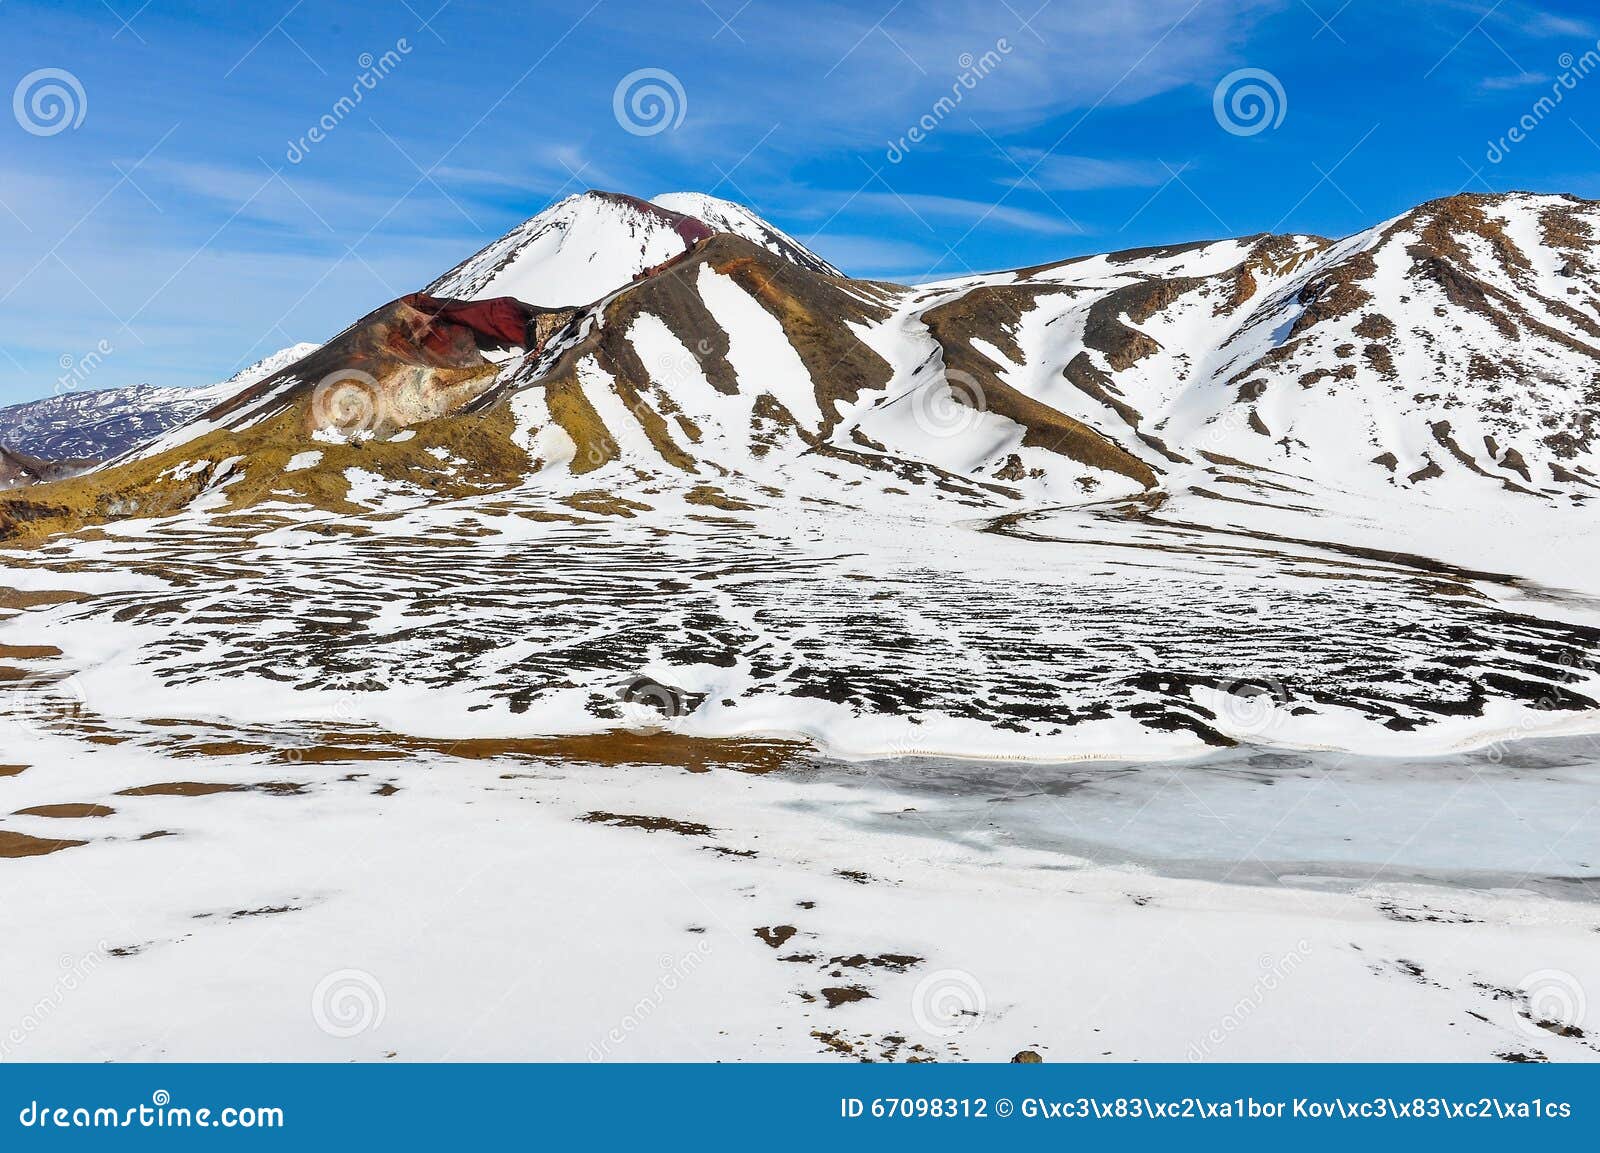 Central and Red Crater in the Tongariro National Park, New Zealand ...